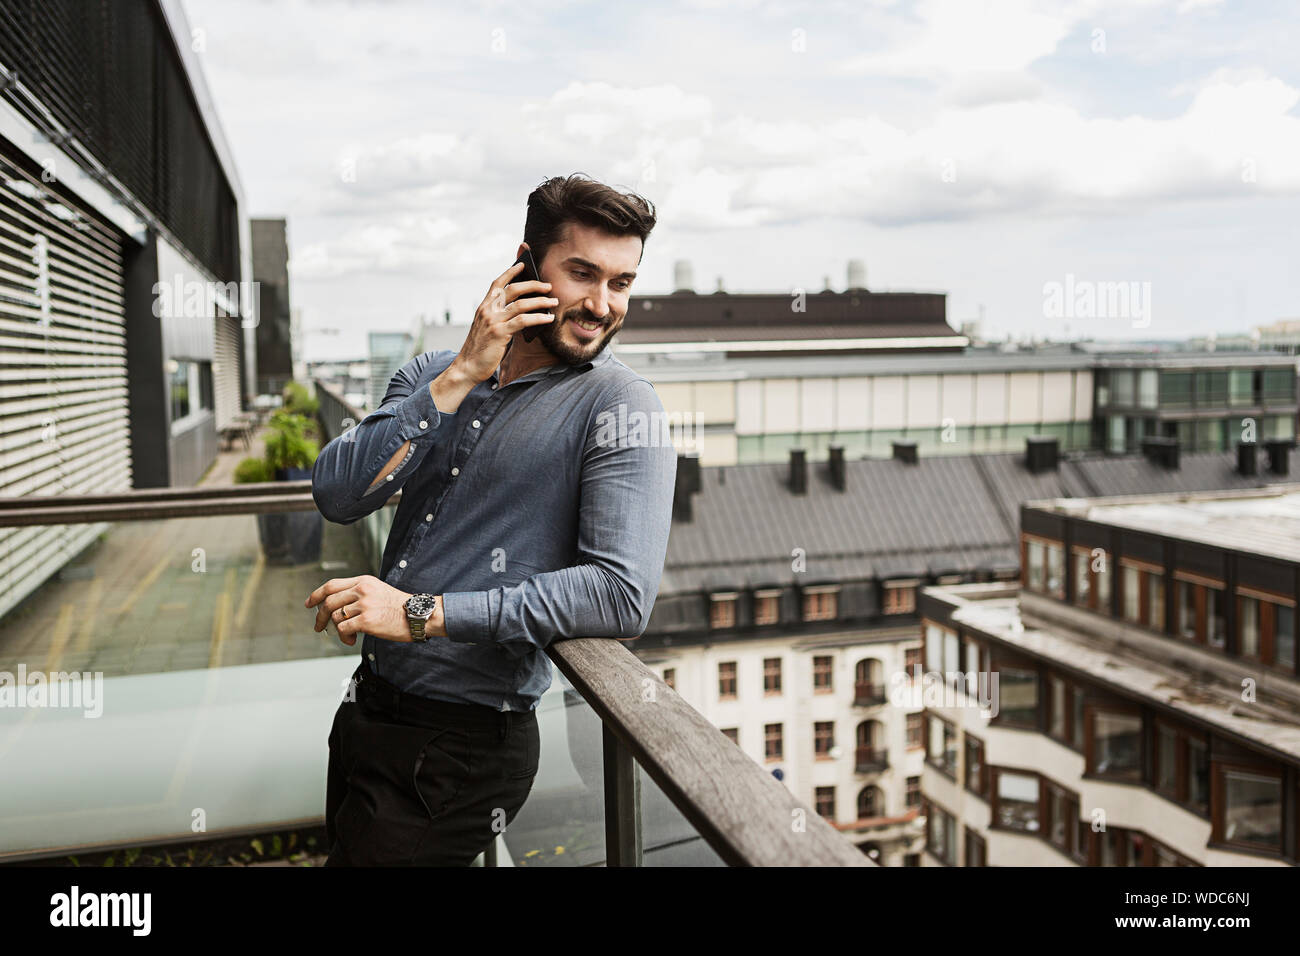 Young man talking on cell phone on balcony Stock Photo